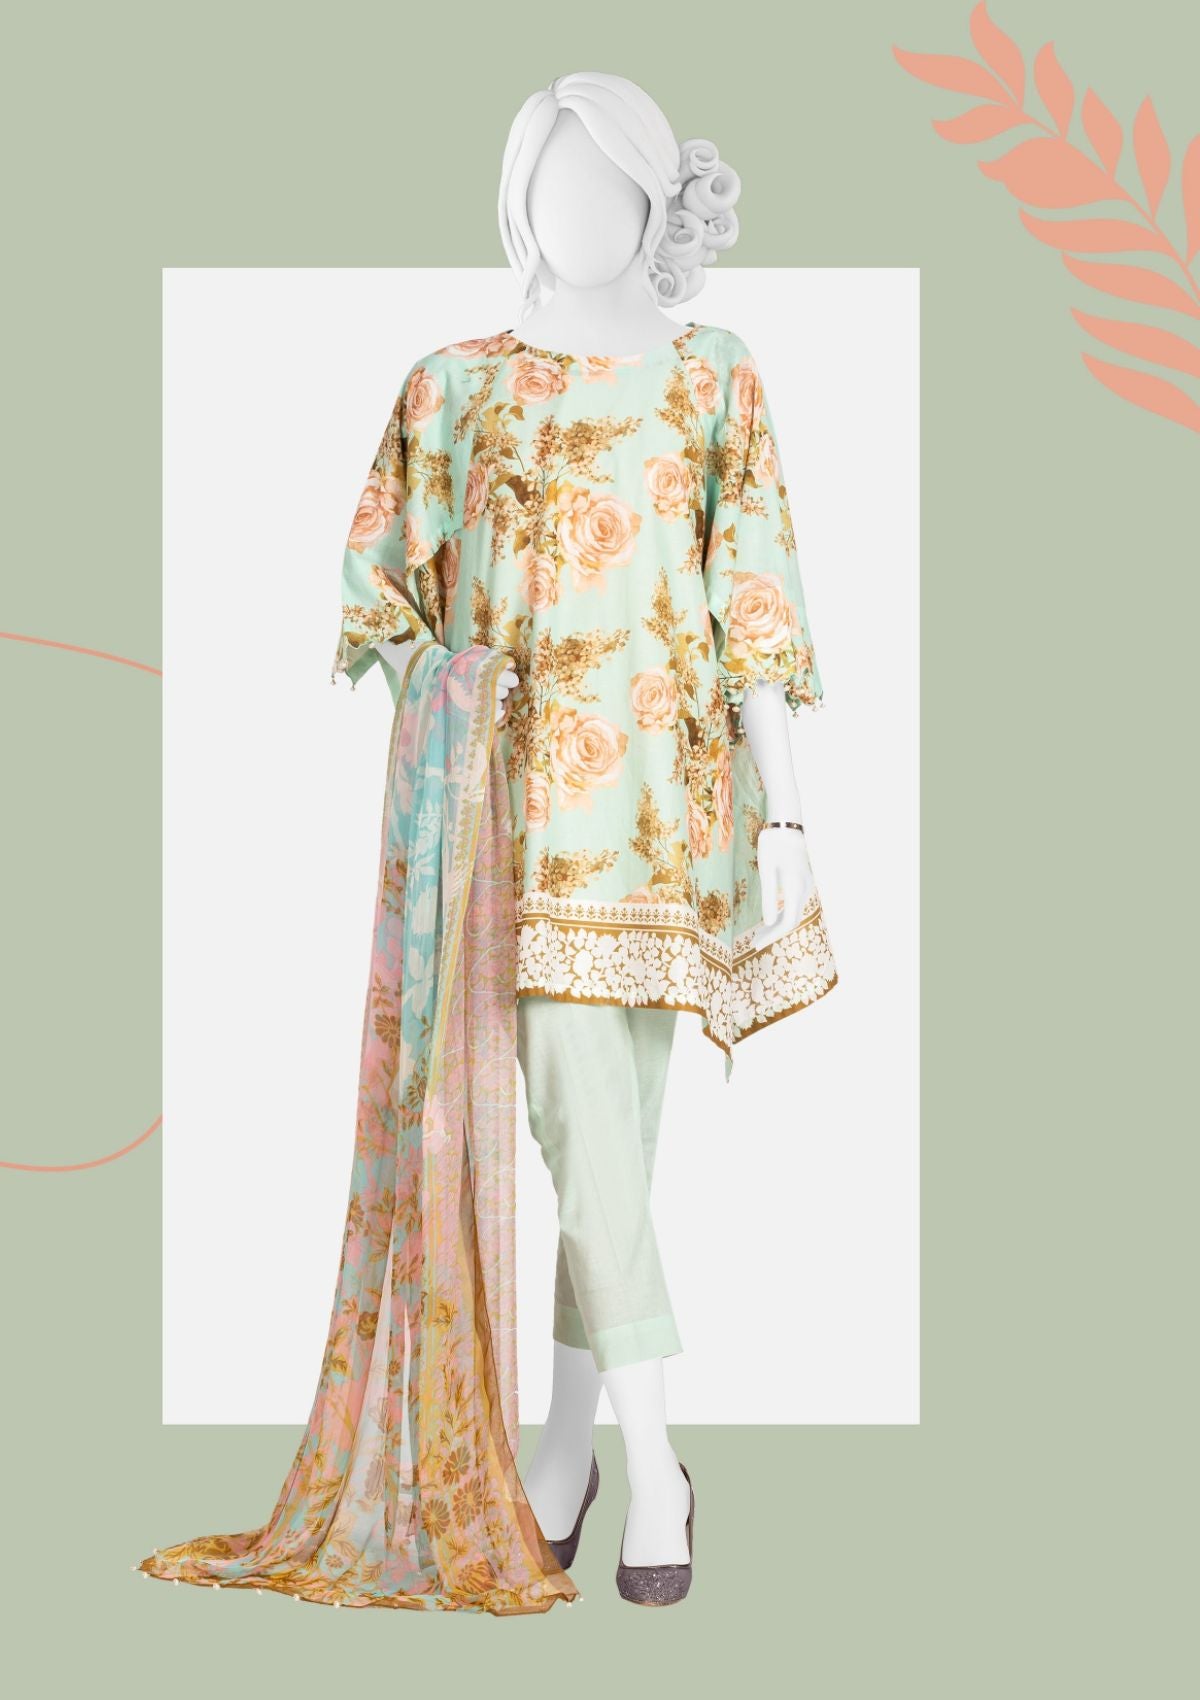 Lawn Collection - Panjnad - Dastaan - PLU24#1062